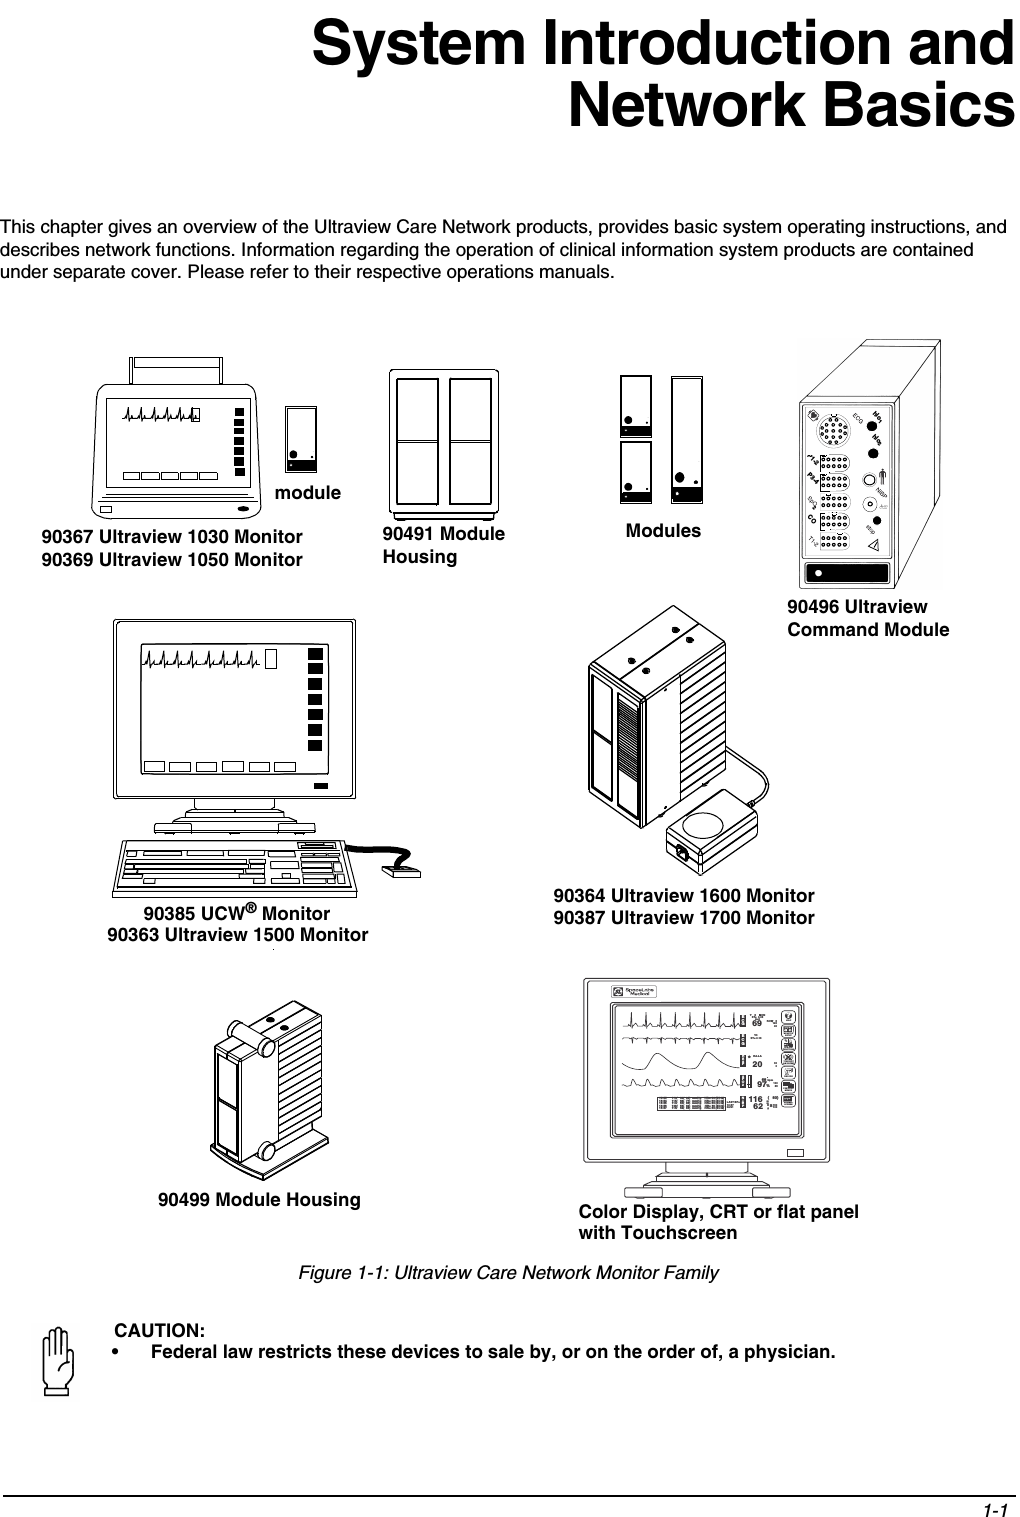 1-1 System Introduction andNetwork BasicsThis chapter gives an overview of the Ultraview Care Network products, provides basic system operating instructions, and describes network functions. Information regarding the operation of clinical information system products are contained under separate cover. Please refer to their respective operations manuals.Figure 1-1: Ultraview Care Network Monitor FamilyCAUTION:• Federal law restricts these devices to sale by, or on the order of, a physician.Modules90491 Module Housingmodule90367 Ultraview 1030 Monitor90369 Ultraview 1050 Monitor             90385 UCW® Monitor 90364 Ultraview 1600 Monitor90387 Ultraview 1700 Monitor90363 Ultraview 1500 MonitoradultNIBPNIBPSpO2P1-2P3-4COhlo2hlo1290496 Ultraview Command Module90499 Module Housing15:55      110/   68(  84)  mmHg    HR= 69 (ECG)16:54      115/   68(  77)  mmHg    HR= 69 (ECG)16:55      113/   55(  88)  mmHg    HR= 69 (ECG)16:56      108/   56(  82)  mmHg    HR= 69 (ECG)16:57      116/   62(  83)  mmHg    HR= 69 (ECG)ECGECGRESPSPO2NIBPLAST BP=16:5702/211166297206968bpm%(   83)mmHg15010010085300ROW   512040RA-LAV3ST=-0.16♥    II    MONST=  0.08A=0*S*21 FEB 1994?HELPMONITORSETUPSPECIALFUNCTIONSR  XTONE RESETALM SUSPENDRECORDPREVIOUSMENUSNORMALSCREENColor Display, CRT or flat panelwith Touchscreen